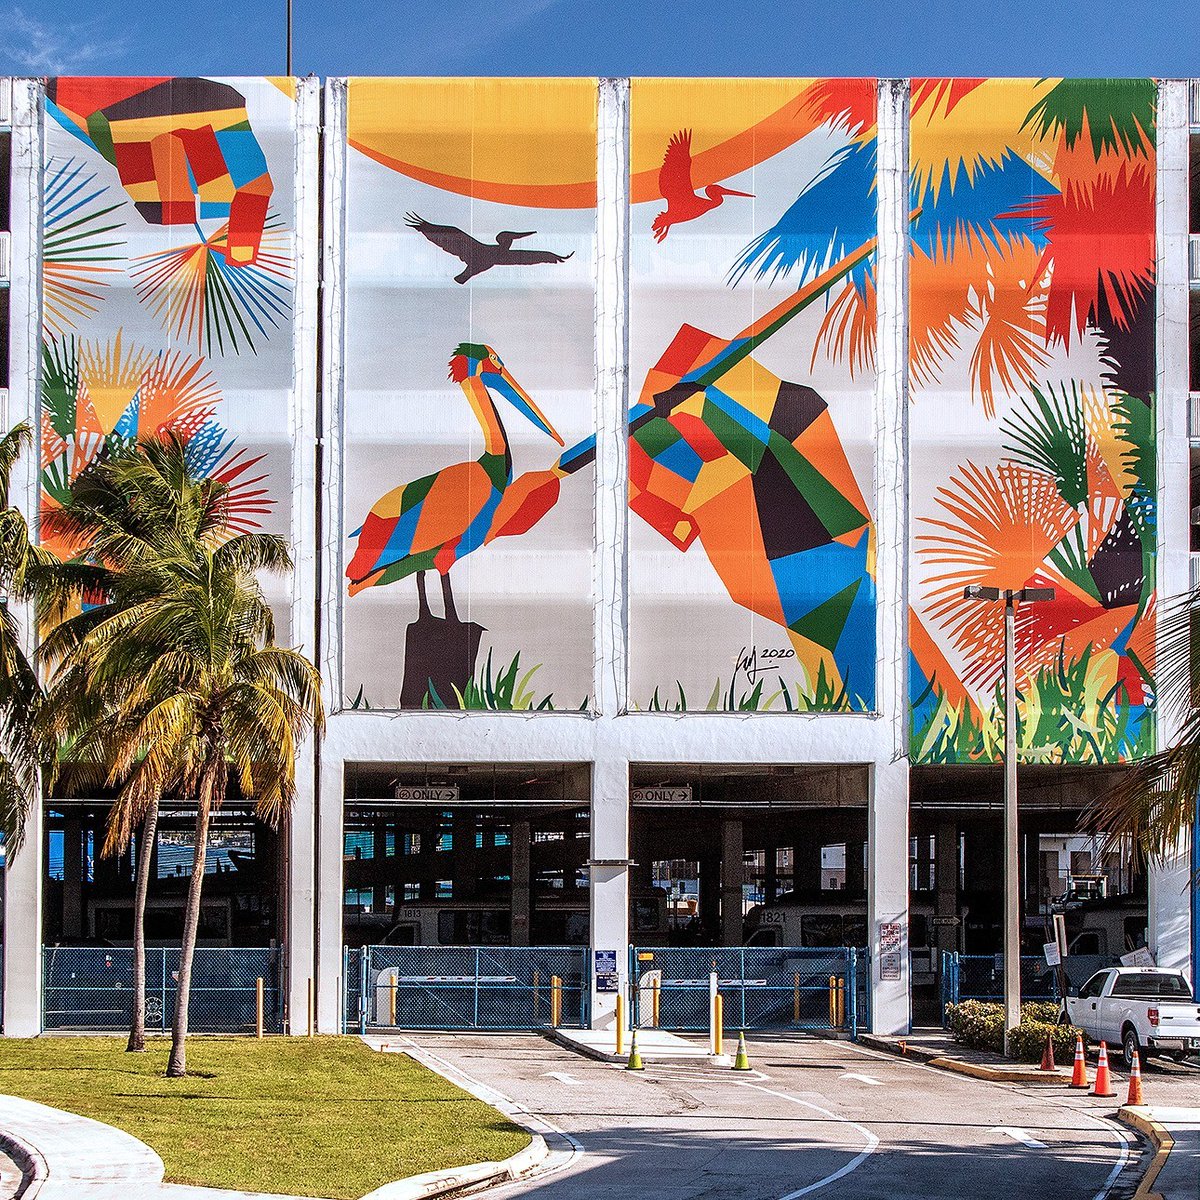 One of our newest & most vibrant art installations is a rich representation of nature & culture. Created by @OJeyifous, a Nigerian-born visual artist based in Brooklyn, New York, “Vista Unveiled” graces the Palm Garage. #PortEverglades #BlackArt #BlackHistoryMonth @BrowardArts